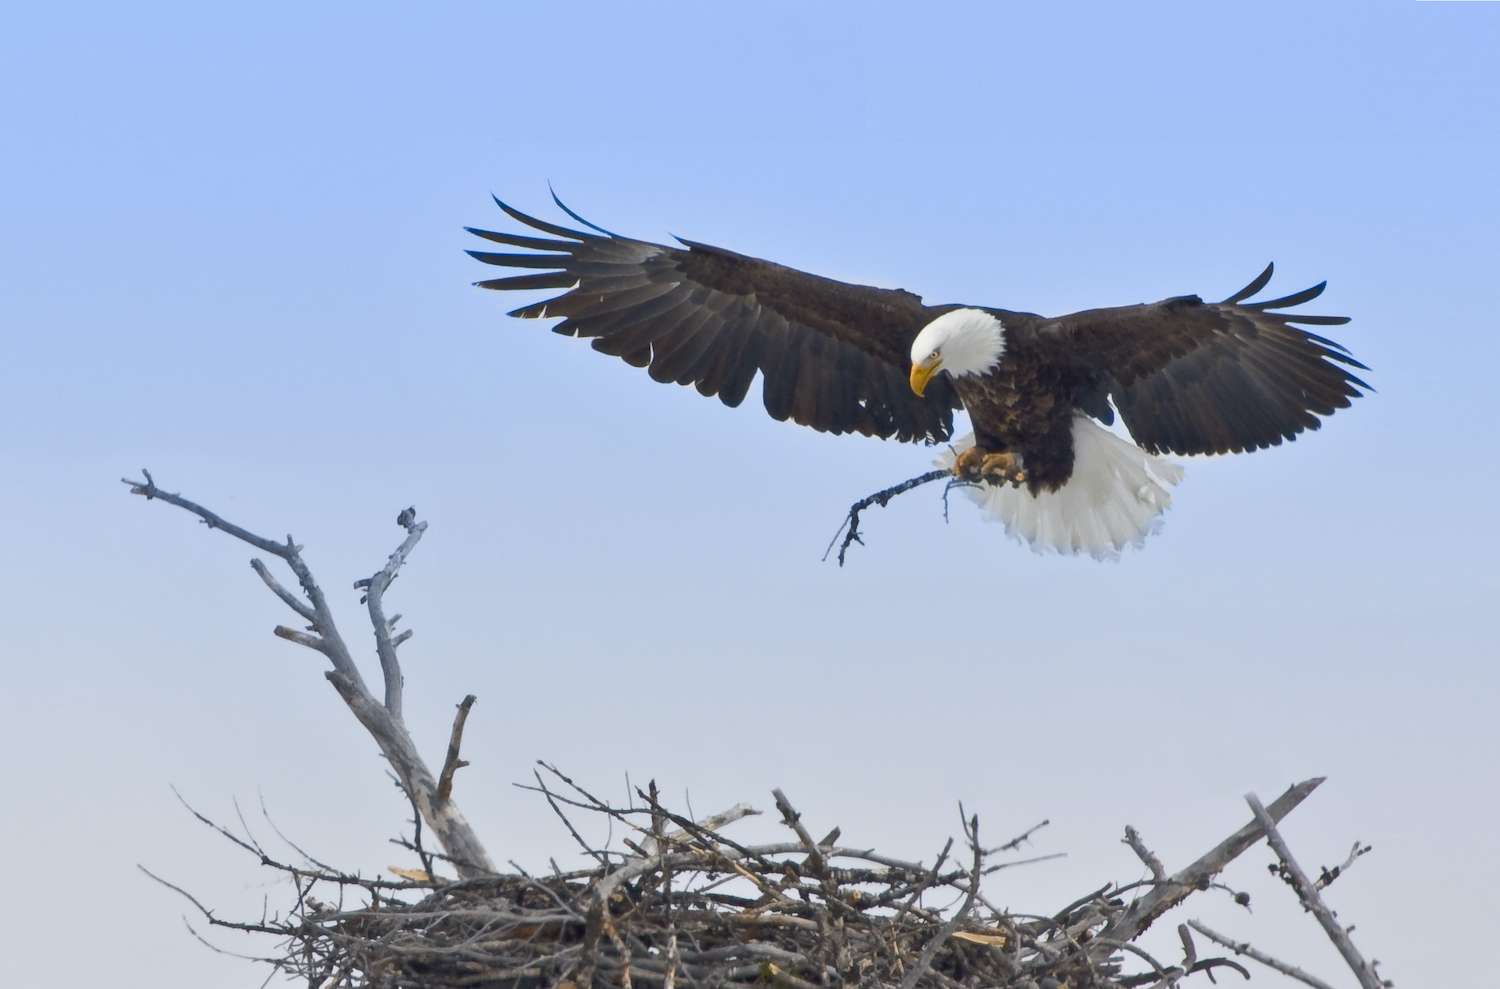  bald eagle adds a branch as its final touch to completing the nest for the eaglets that will soon arrive. Yellowstone National Park, Wyoming.